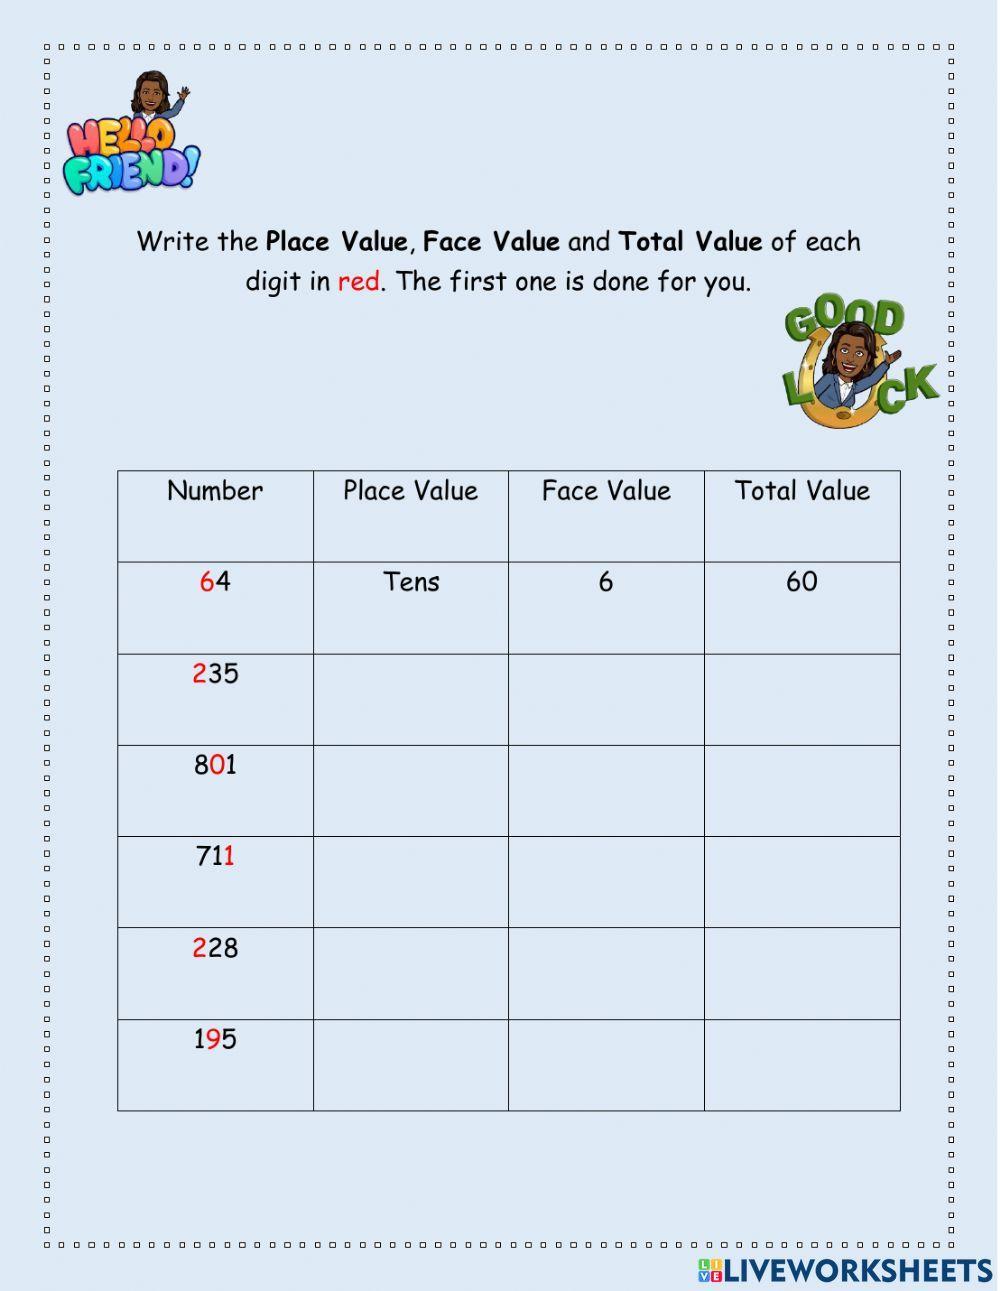 Place Value, Face Value and Total Value